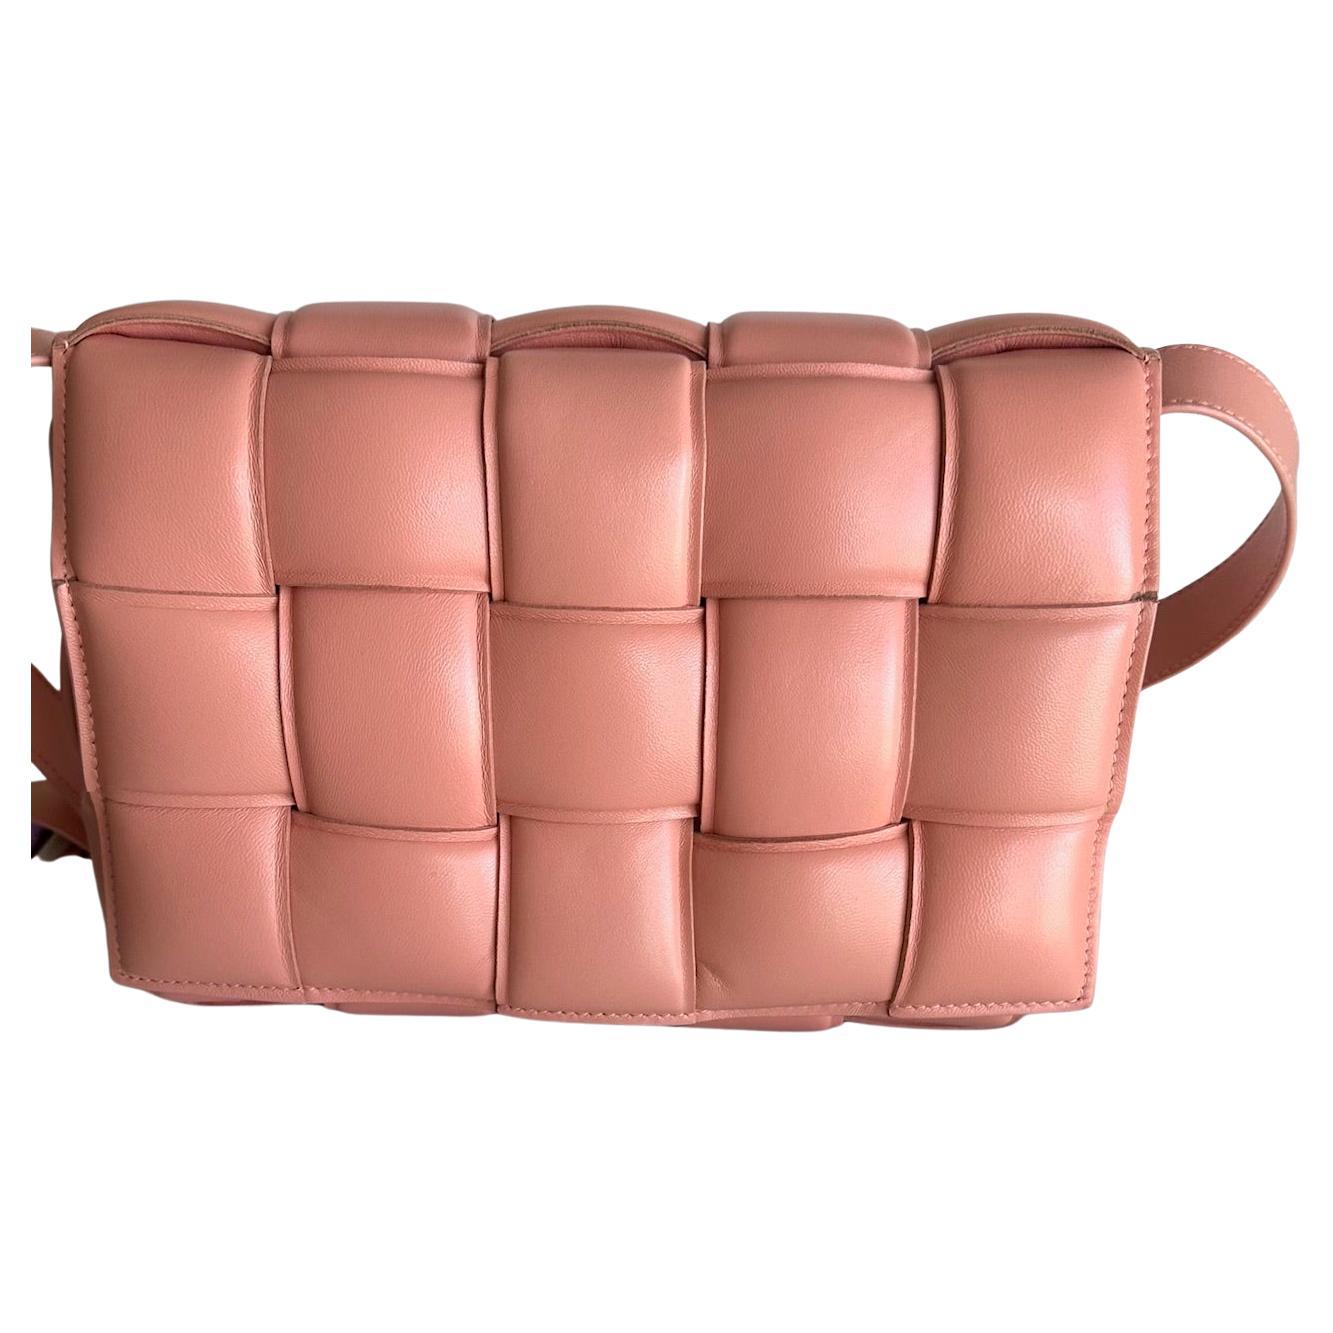 -This beautiful Bottega Veneta Padded cassette bag is a Classic. 
-The color is called 